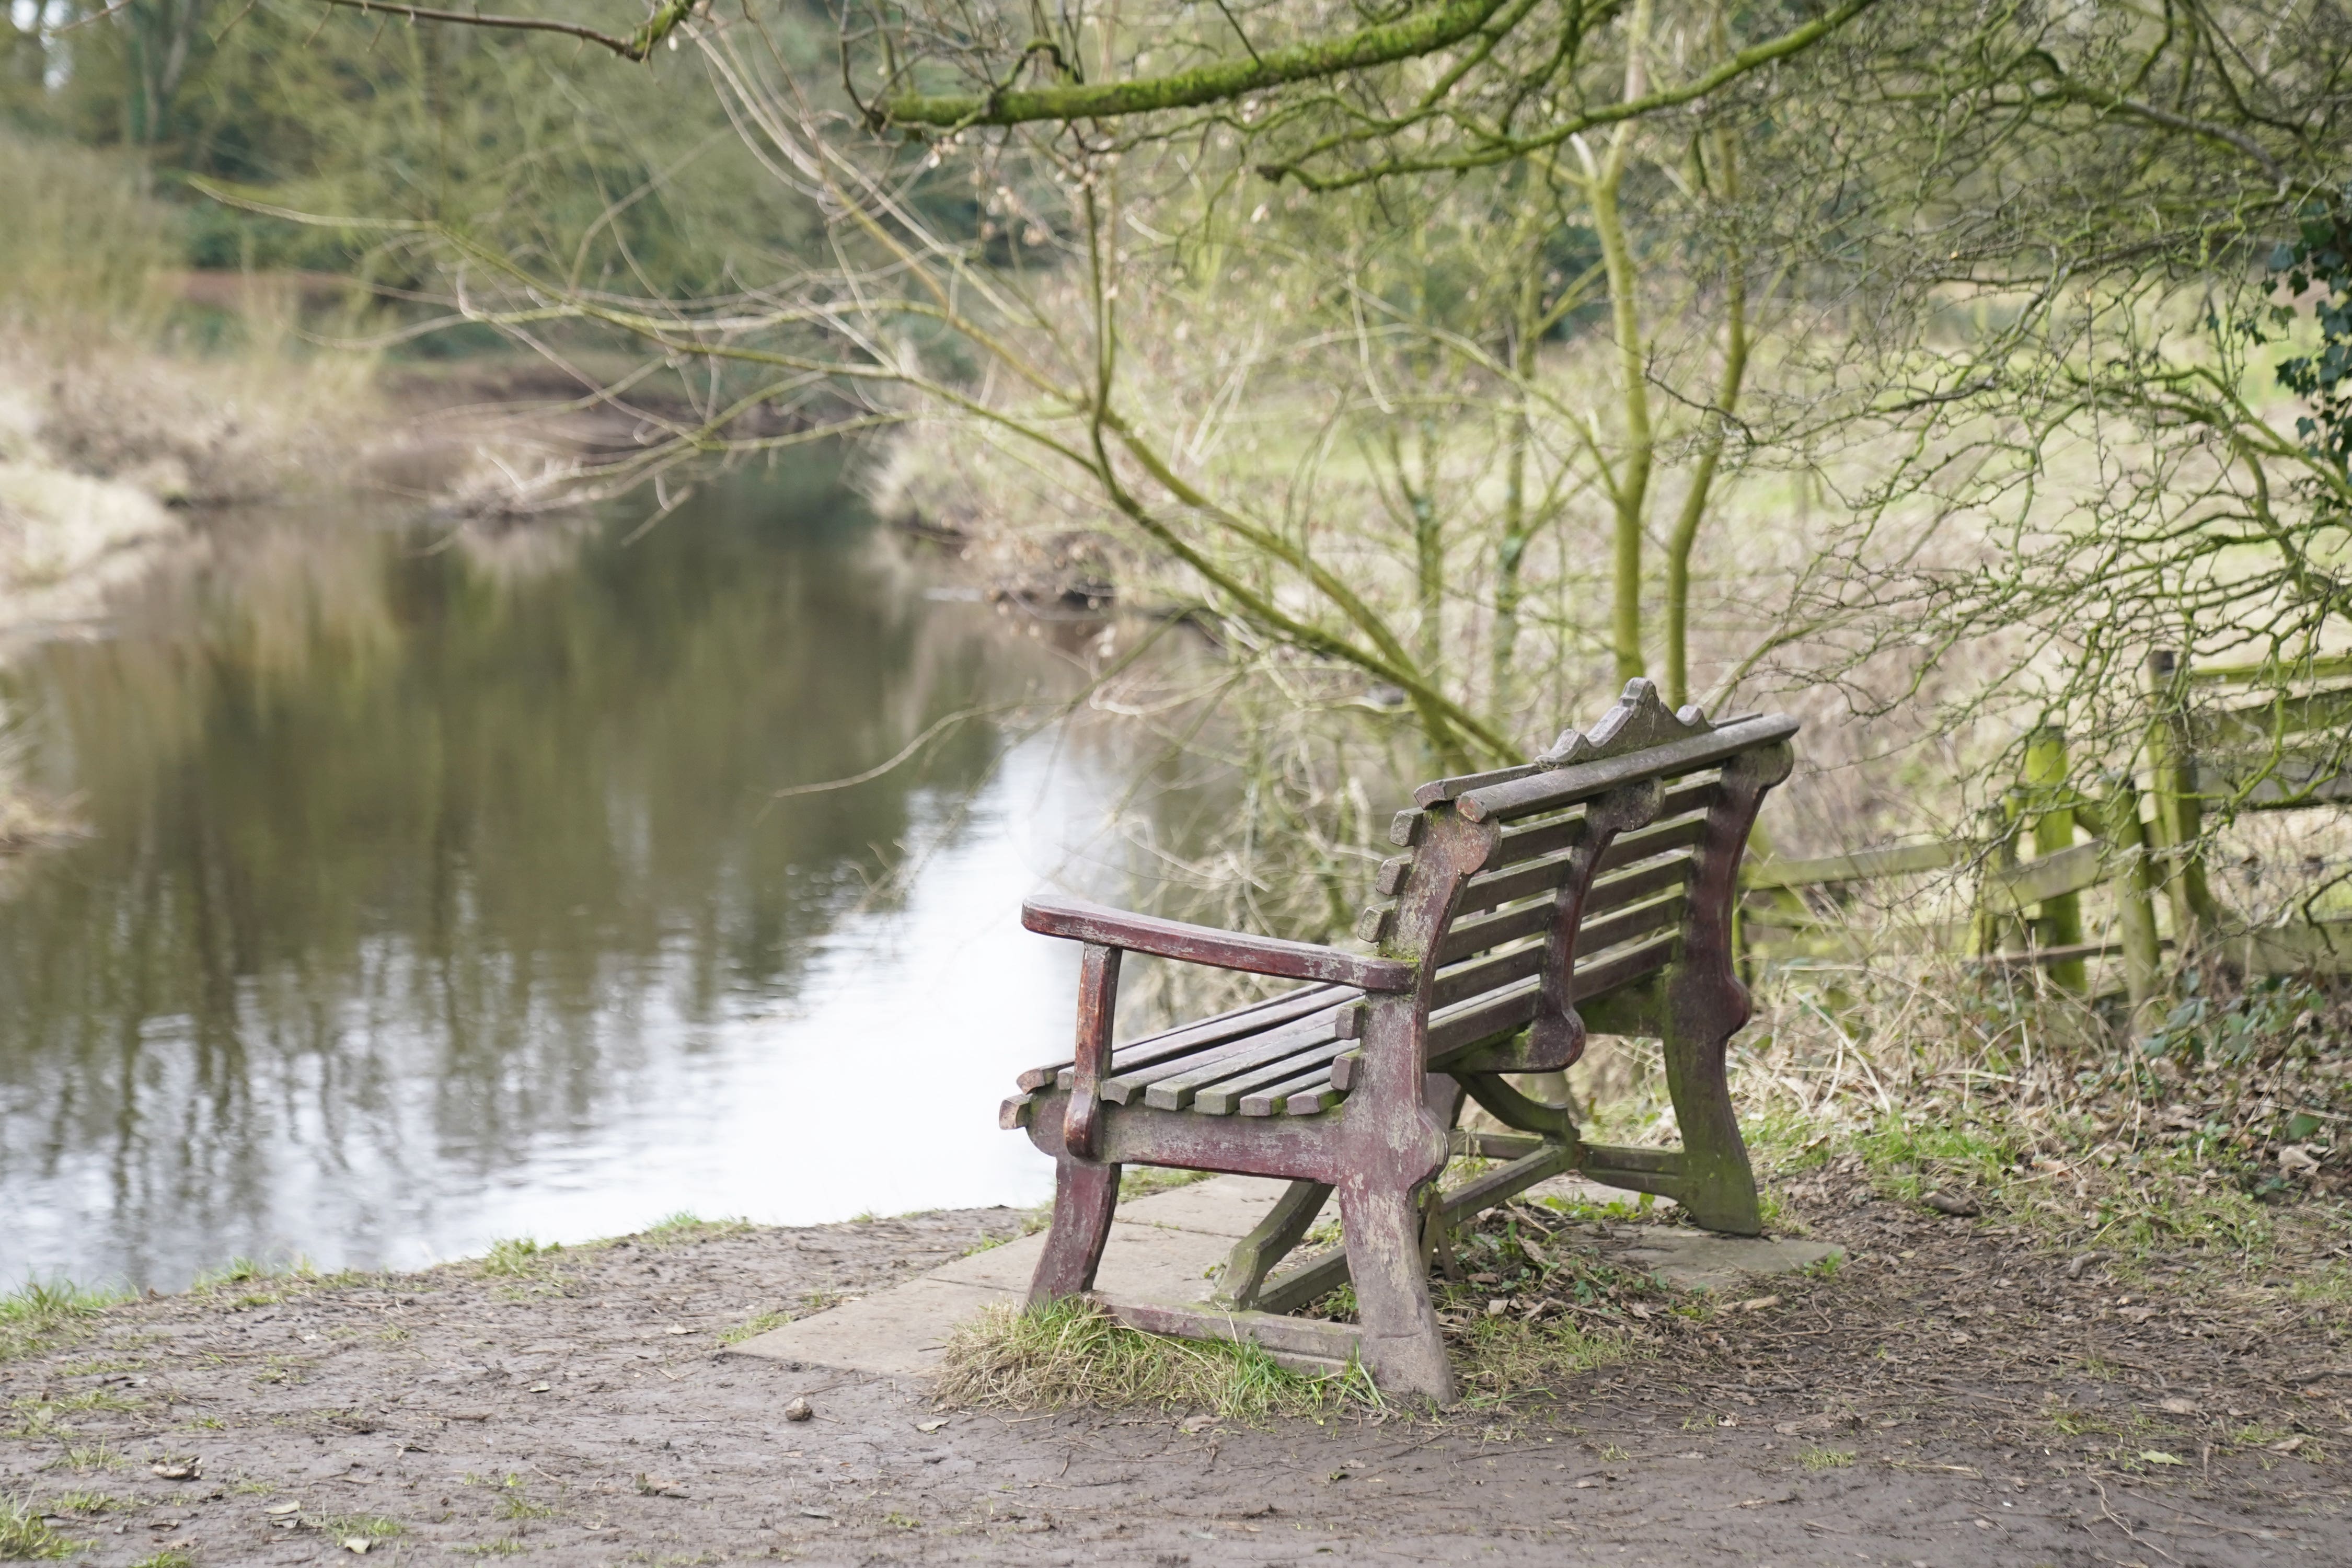 The bench where Nicola Bulley’s phone was found on the banks of the River Wyre